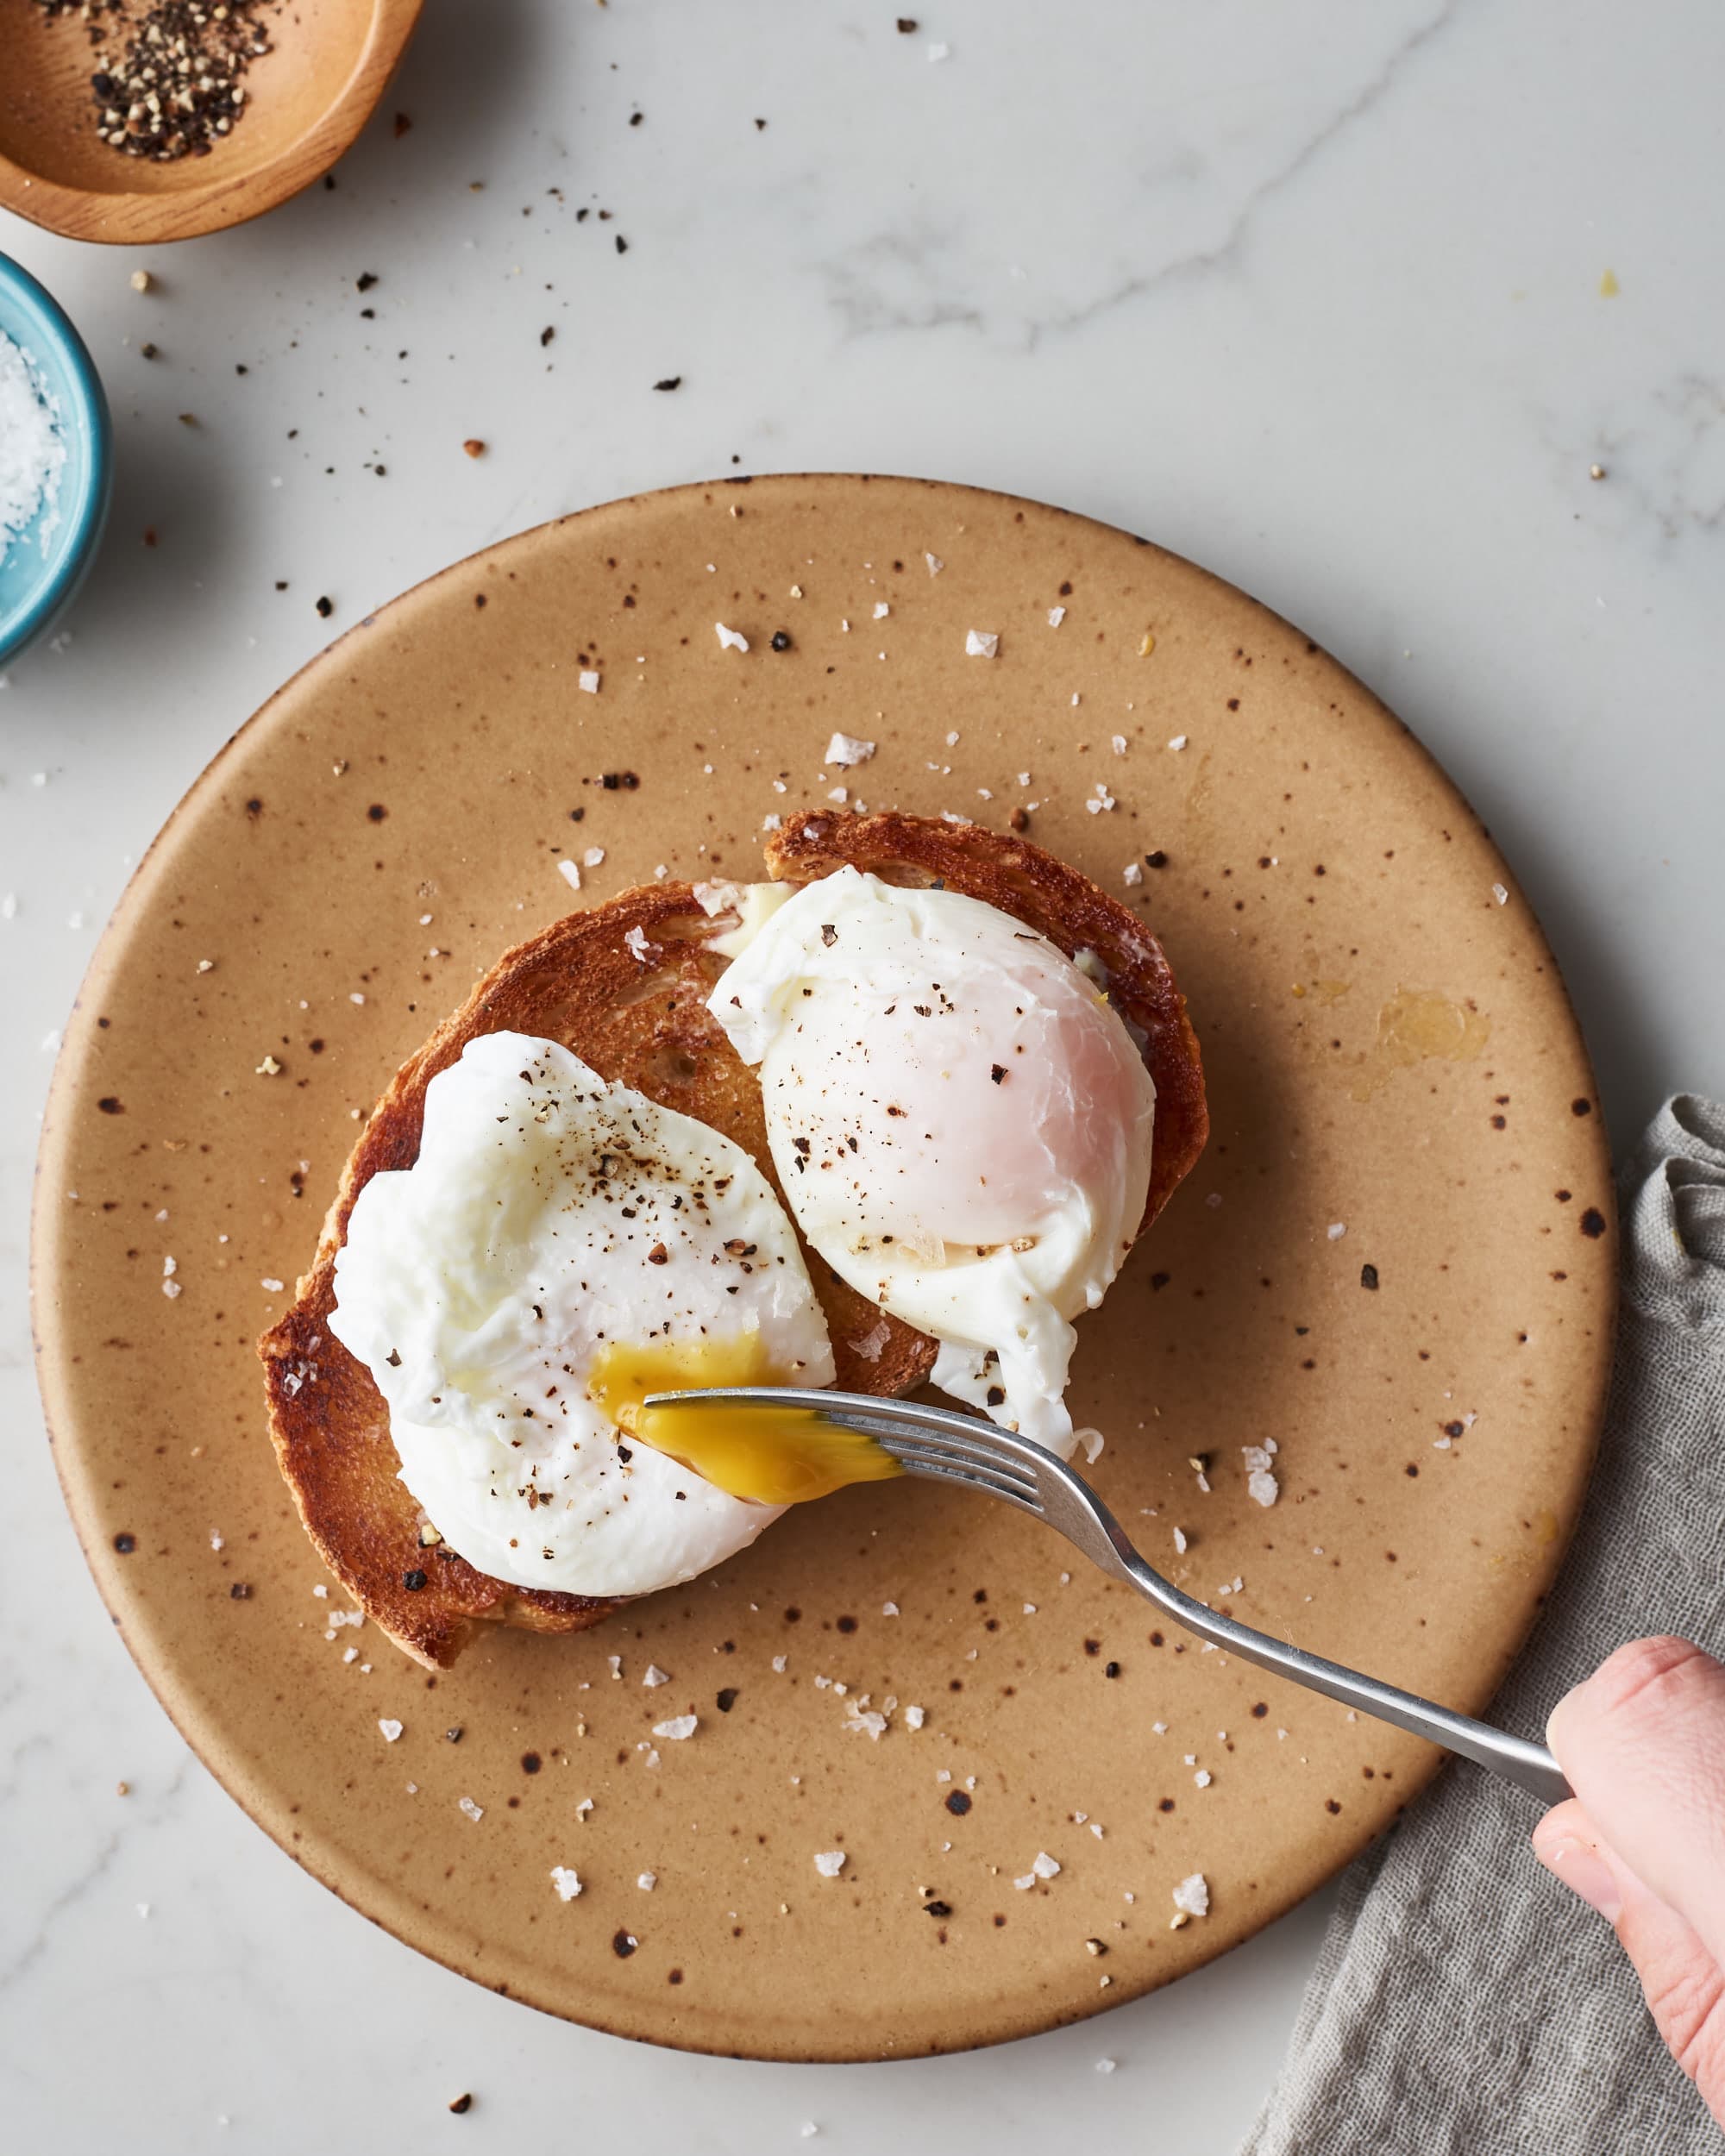 poached egg device